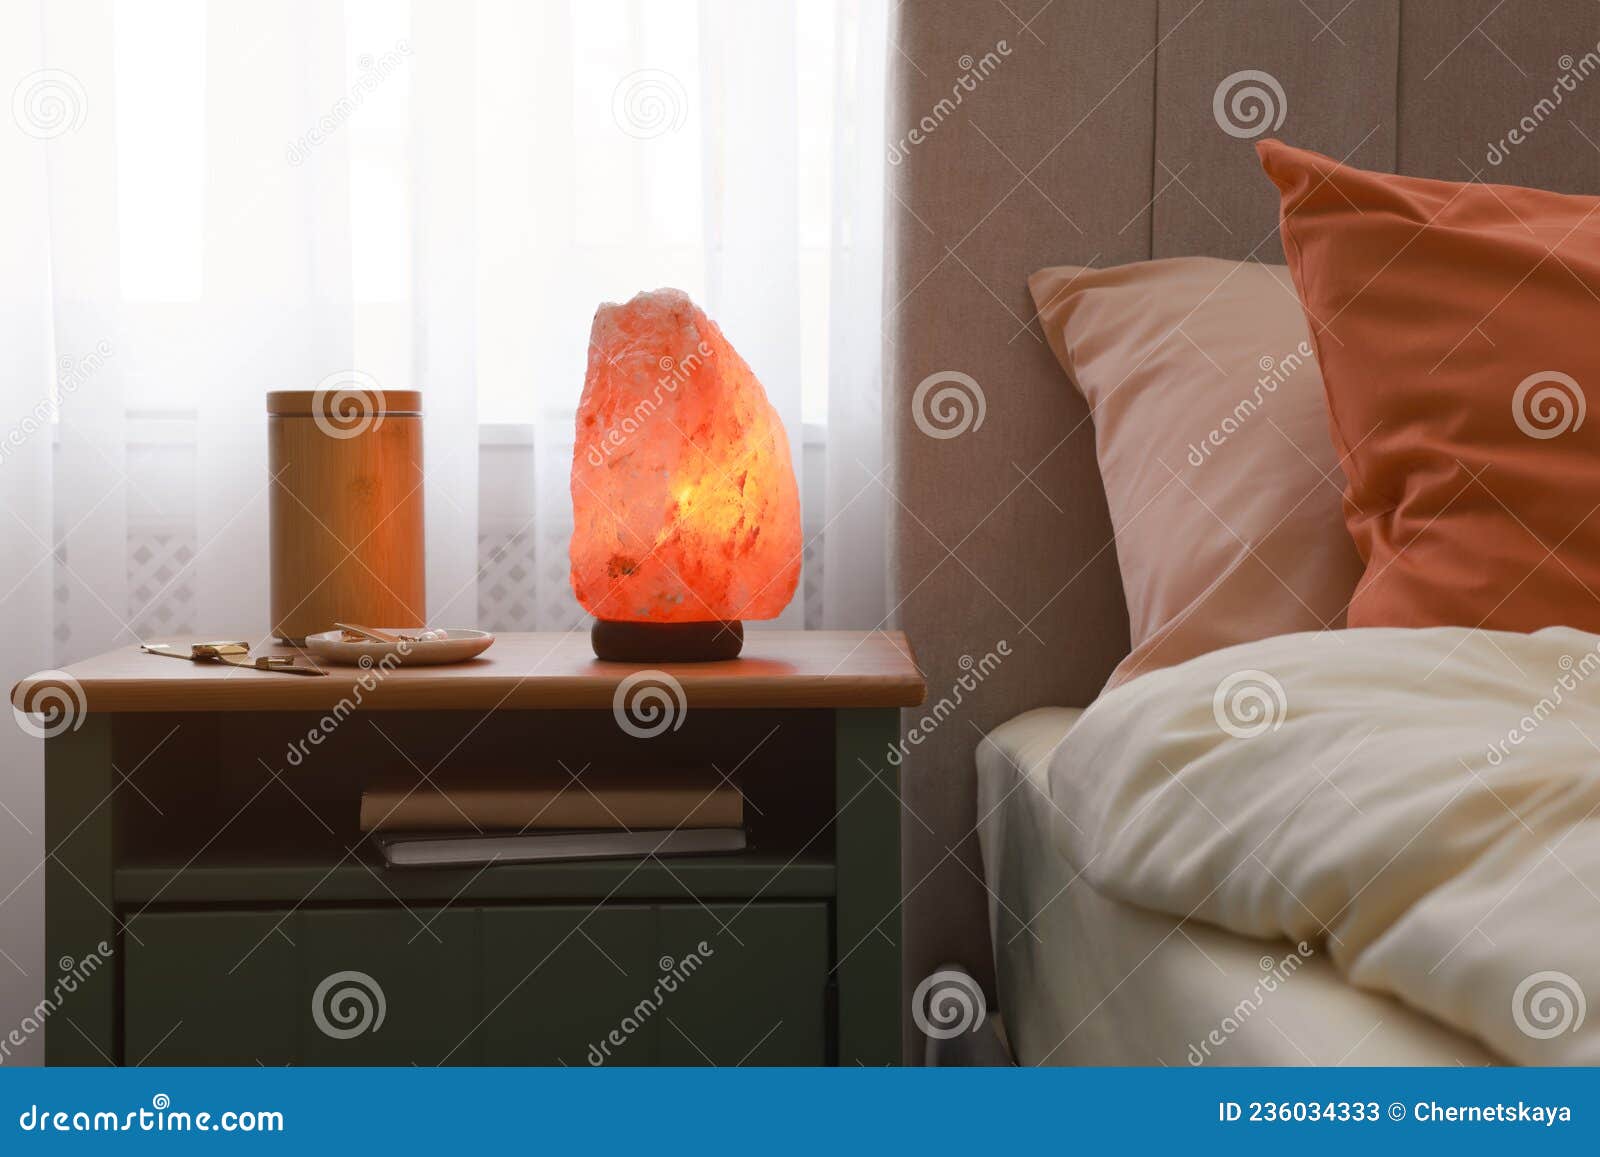 himalayan salt lamp, air ionizer and accessories on nightstand in bedroom